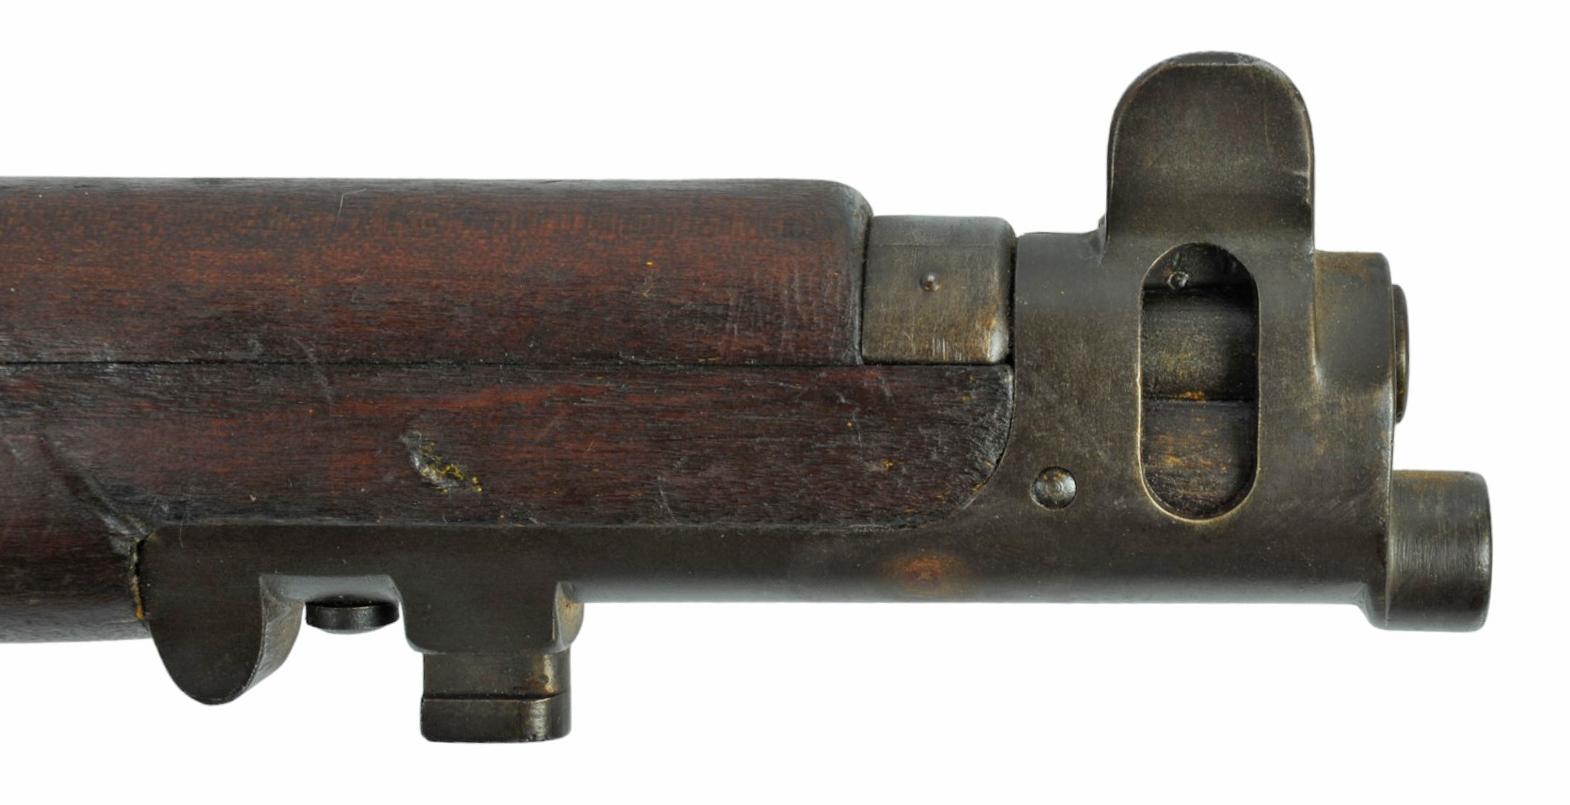 Australian Military WWII issue No.1 III* .303 Lee-Enfield Bolt-Action Rifle - FFL # G22195 (JRW1)